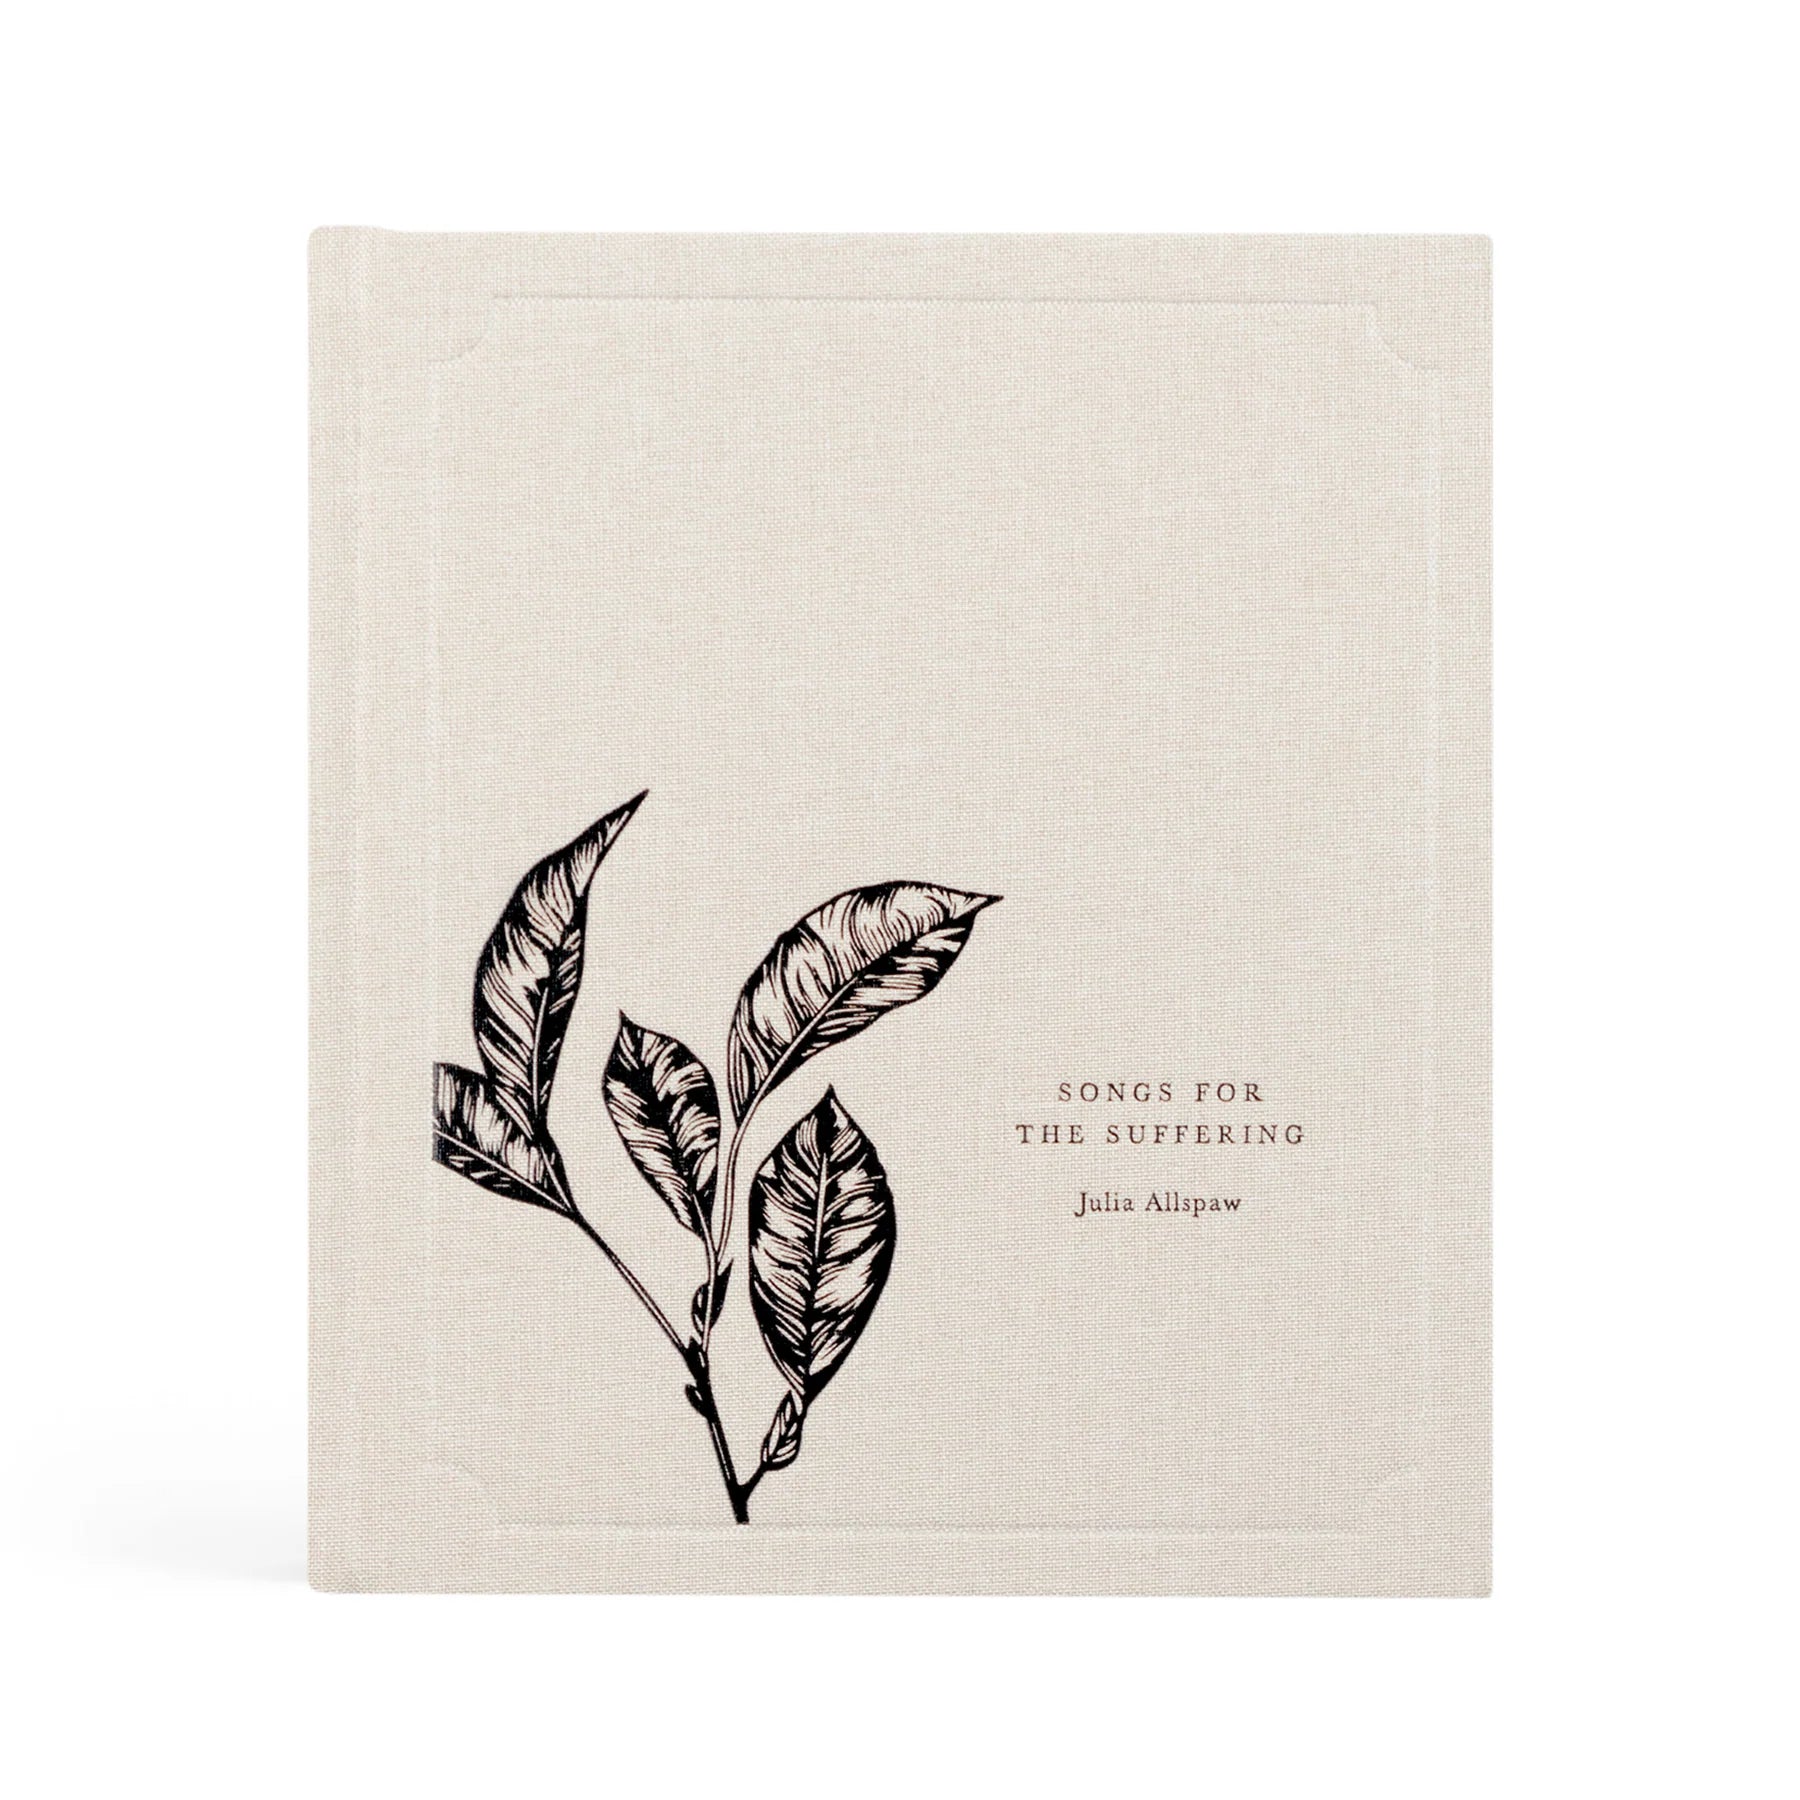 WHITE BOOK WITH BLACK floral and words that read "Sons for the Suffering" By Julia Allspaw